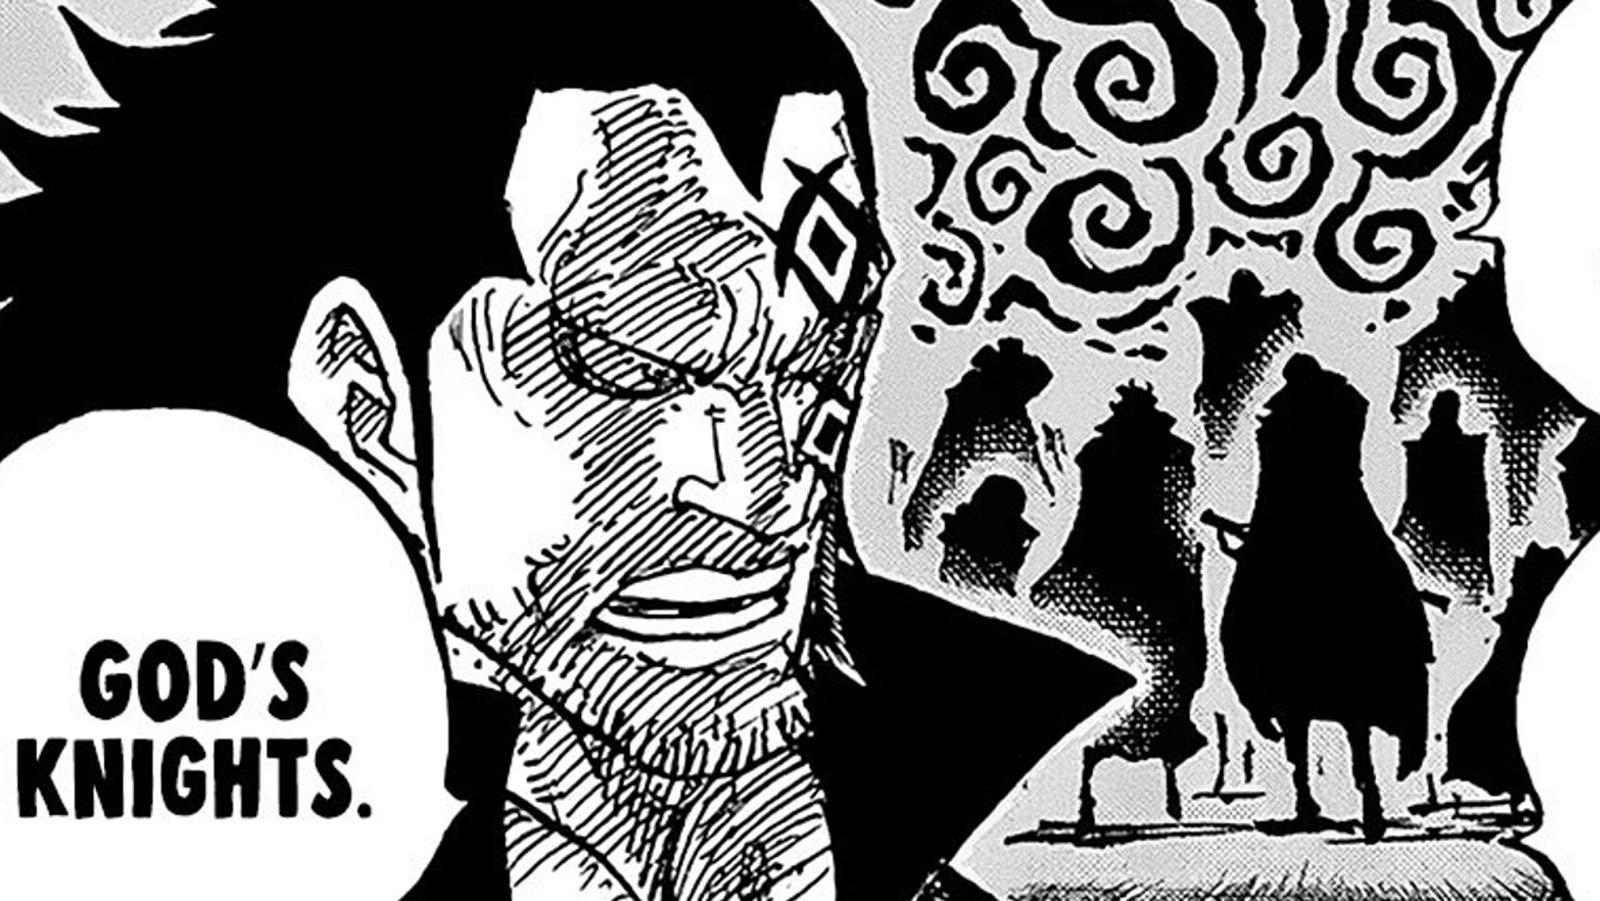 An image featuring the God's Knights silhouette in One Piece